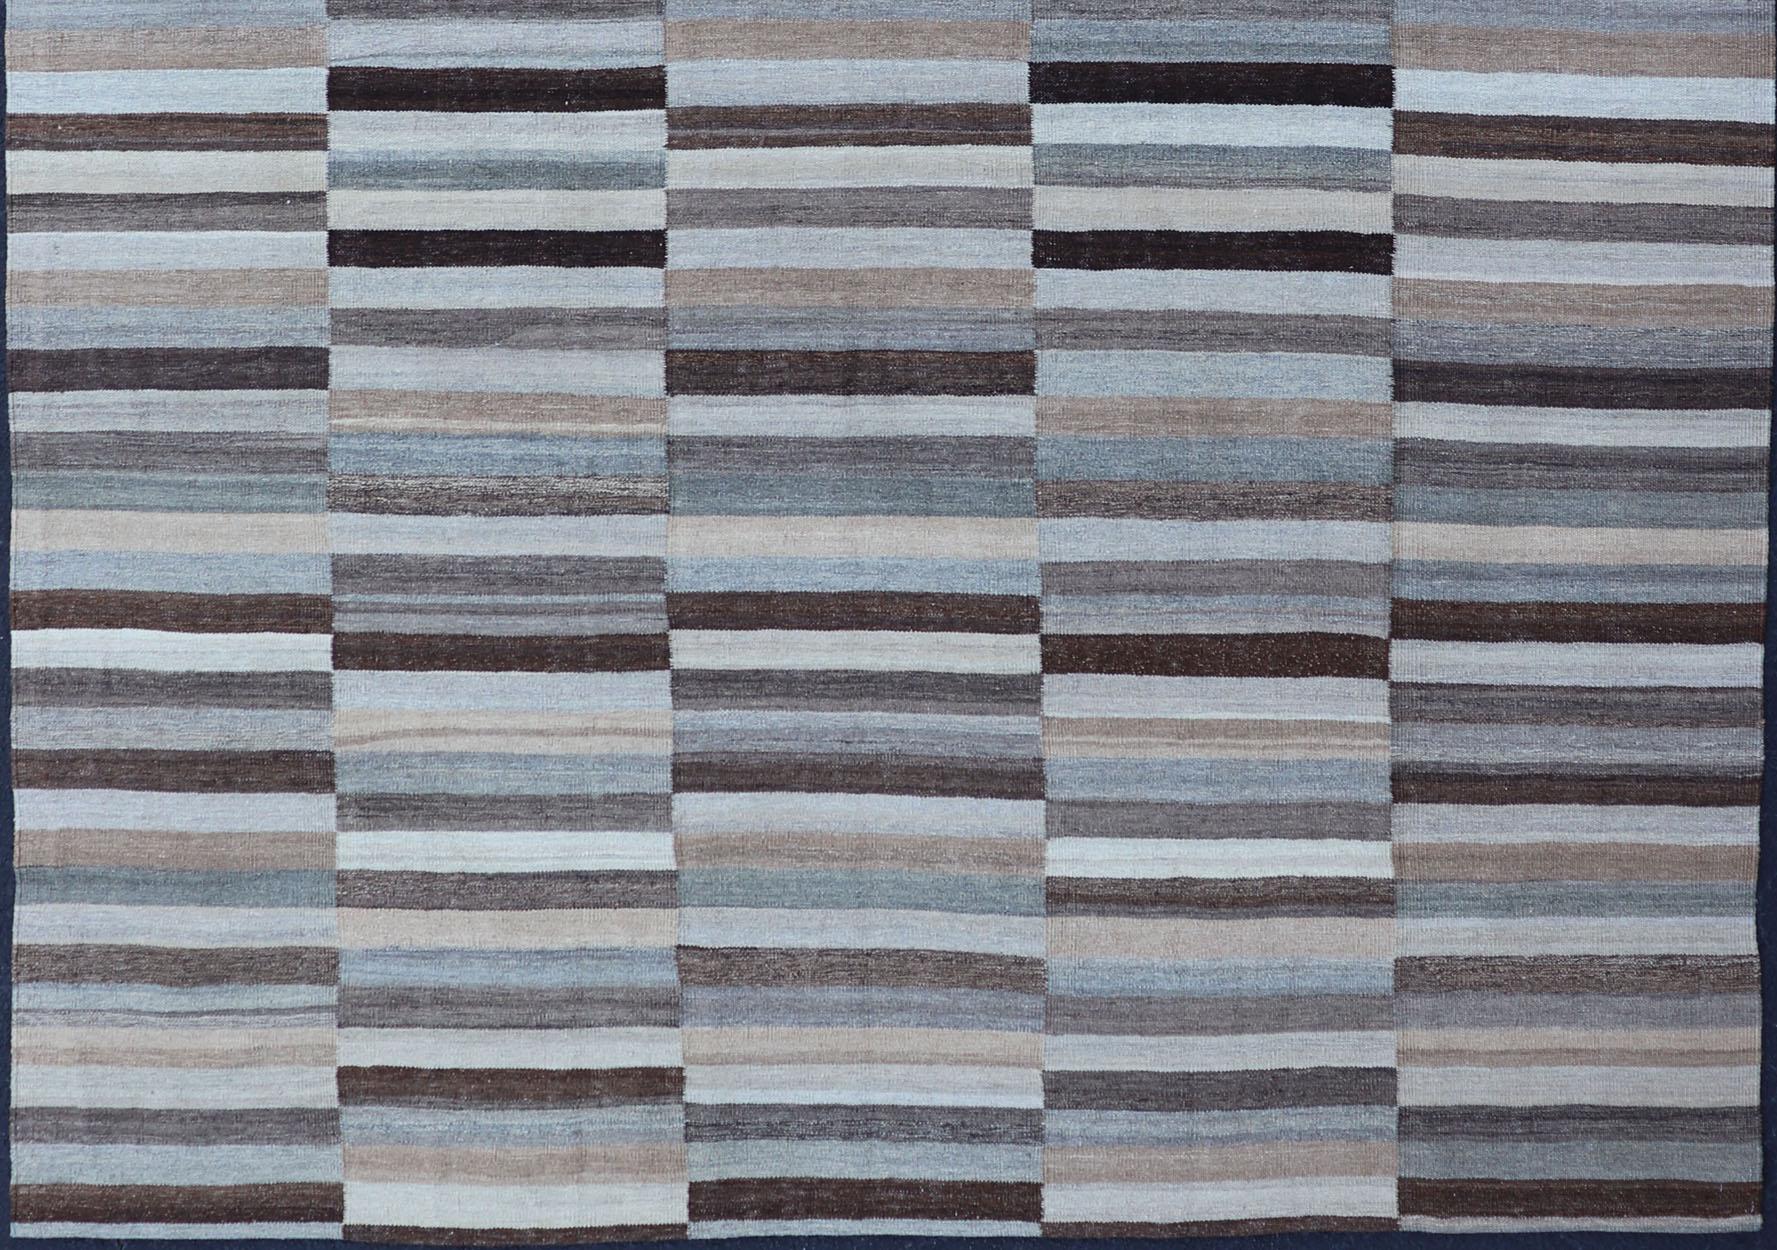 Modern flat-weave Kilim rug with stripes in shades of light ocean blue, charcoal, gray and cream, rug AFG-24713, country of origin / type: Afghanistan / Kilim

This flat-woven kilim rug features a Classic stripe design that places seamlessly in